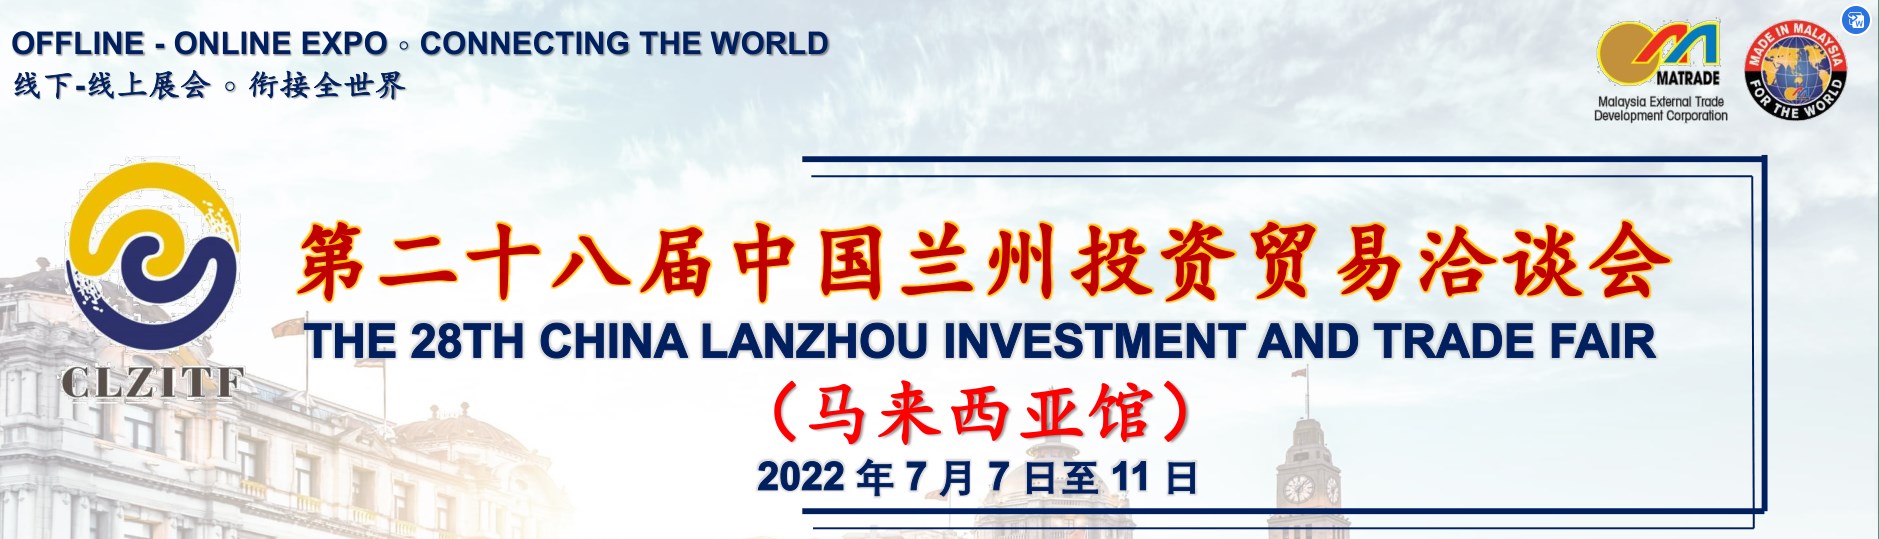 I-China Lanzhou Investment and Trade Fair yama-28